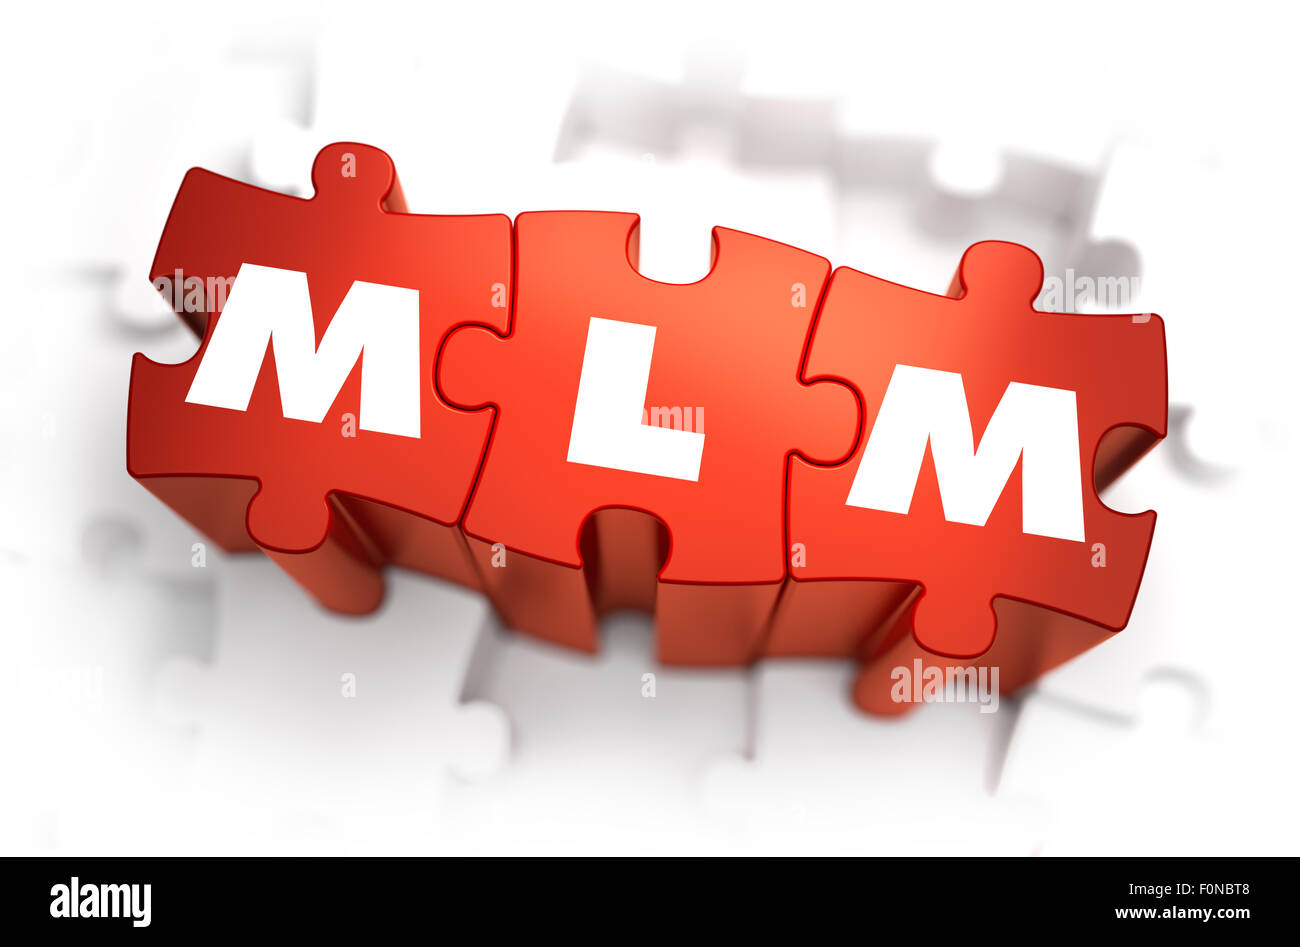 MLM - White Word on Red Puzzles. Stock Photo